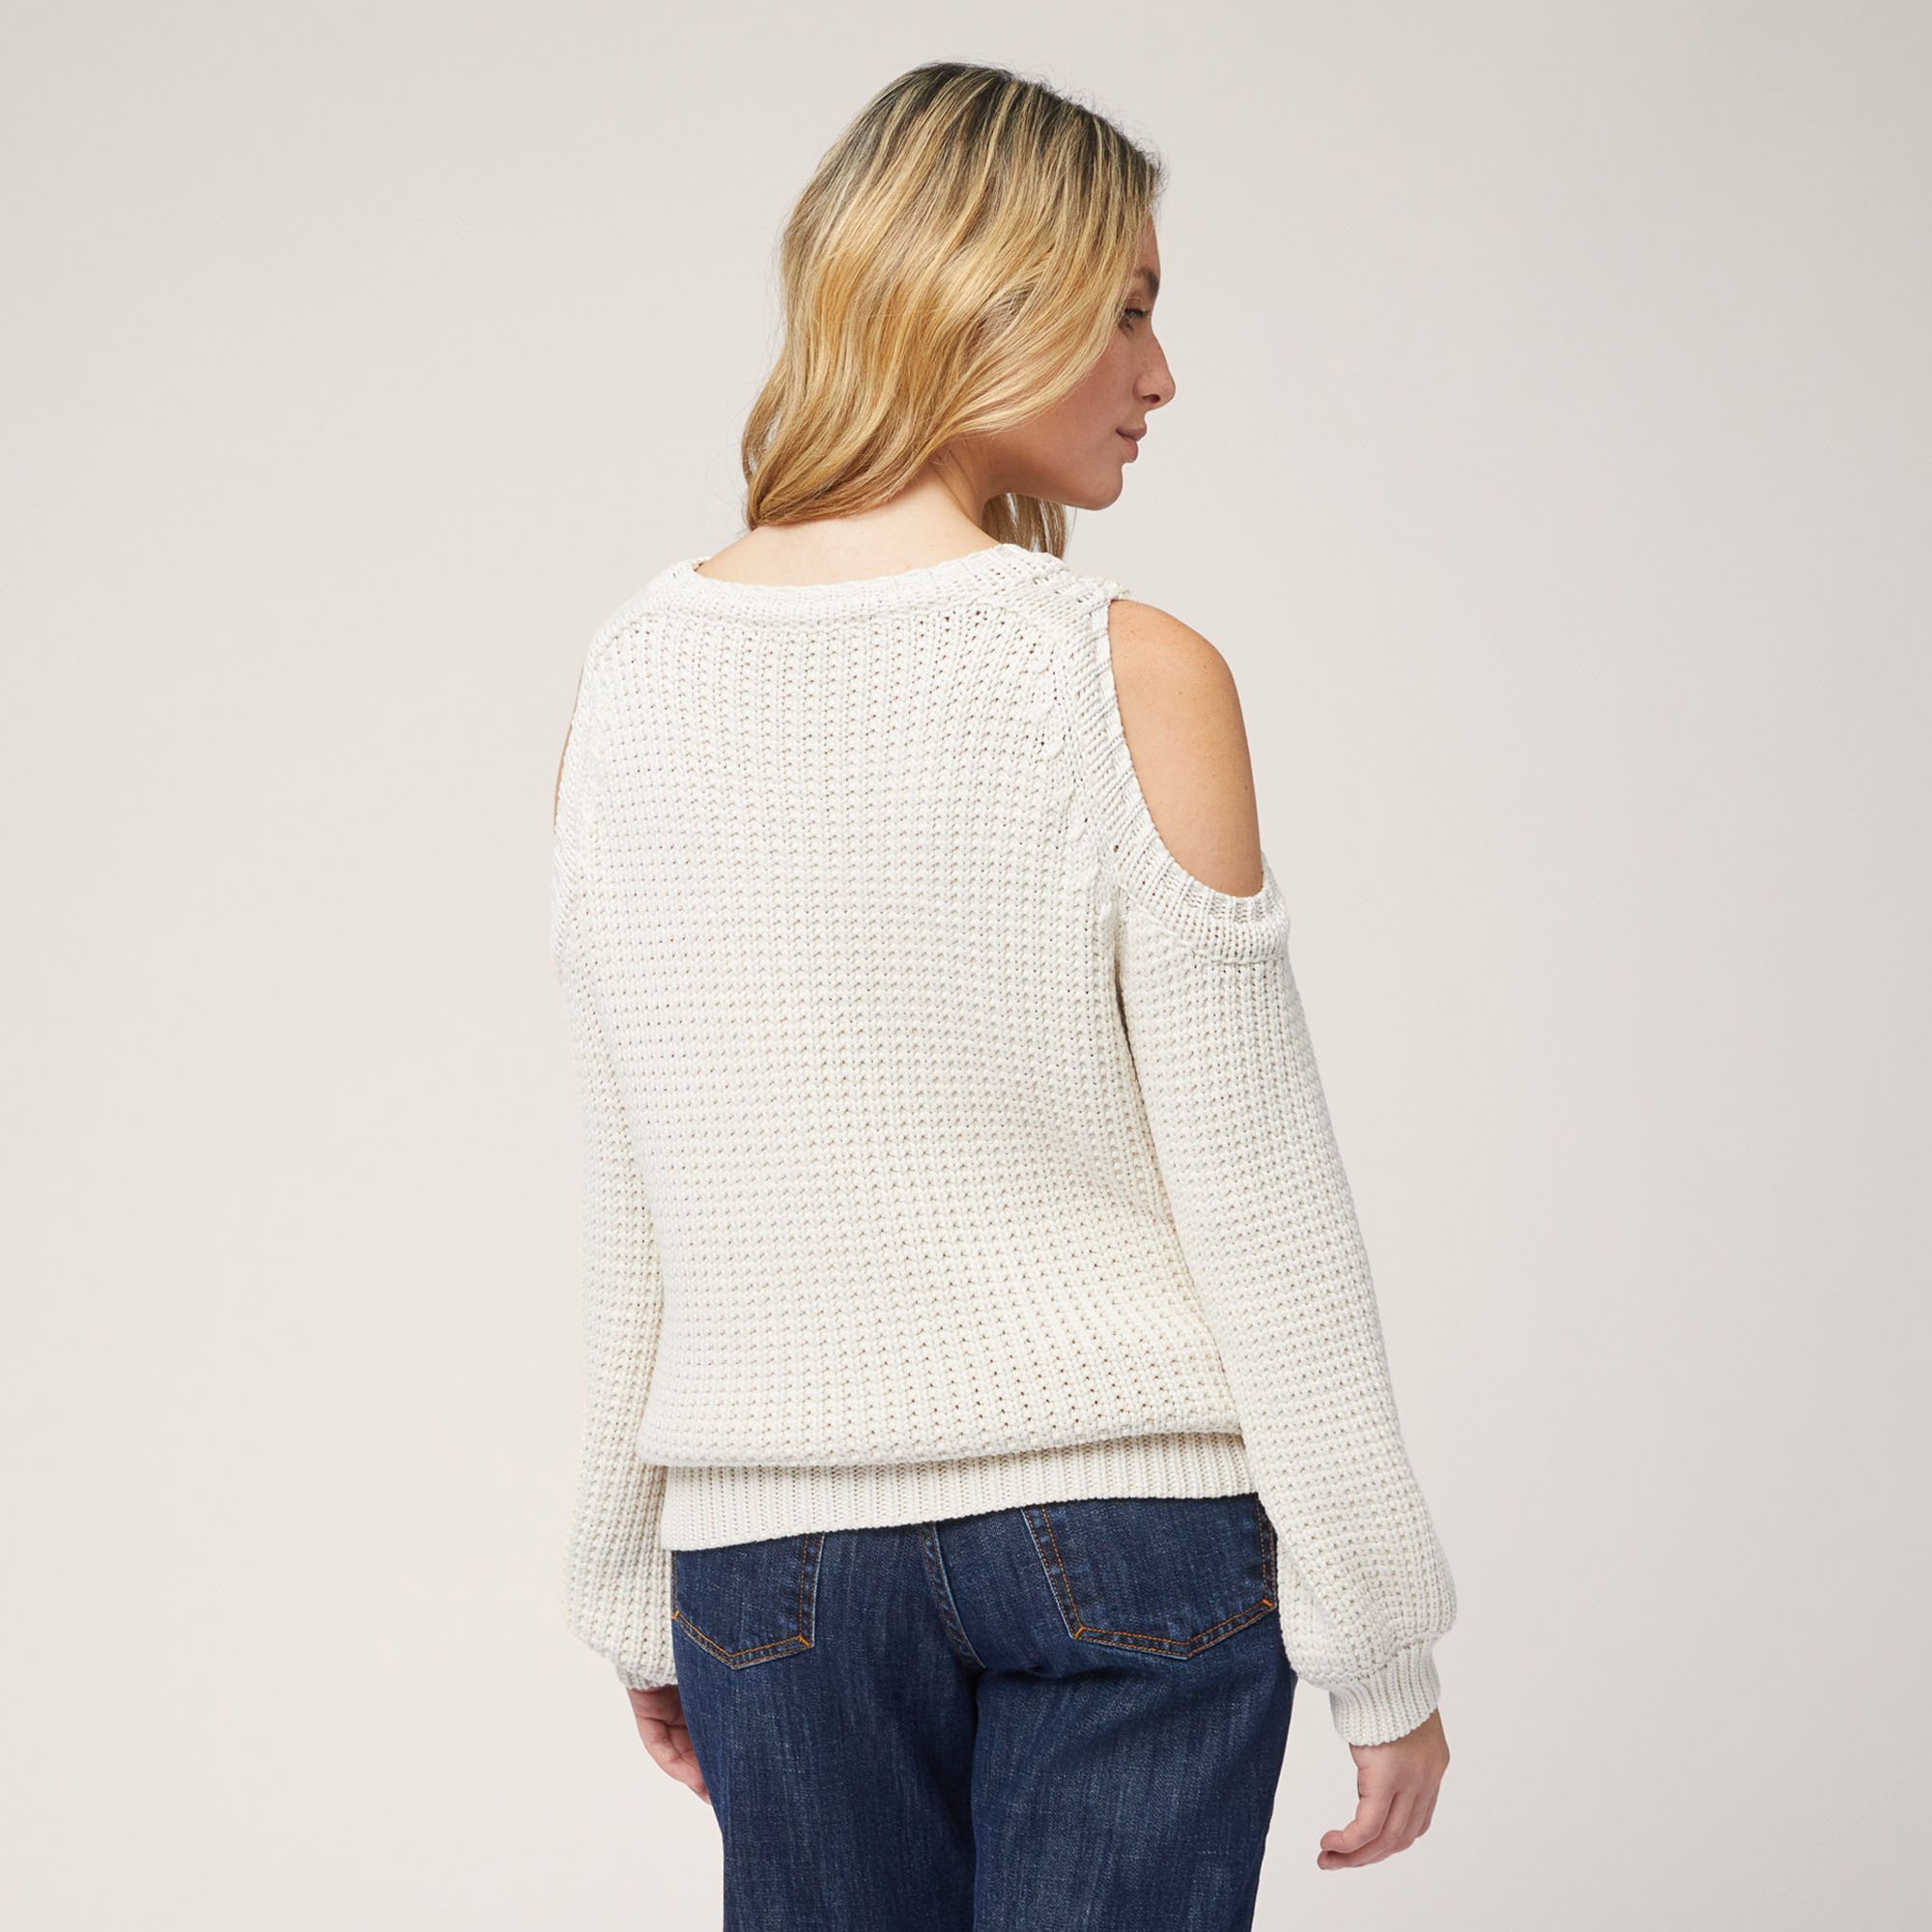 Sweater with Shoulder Openings